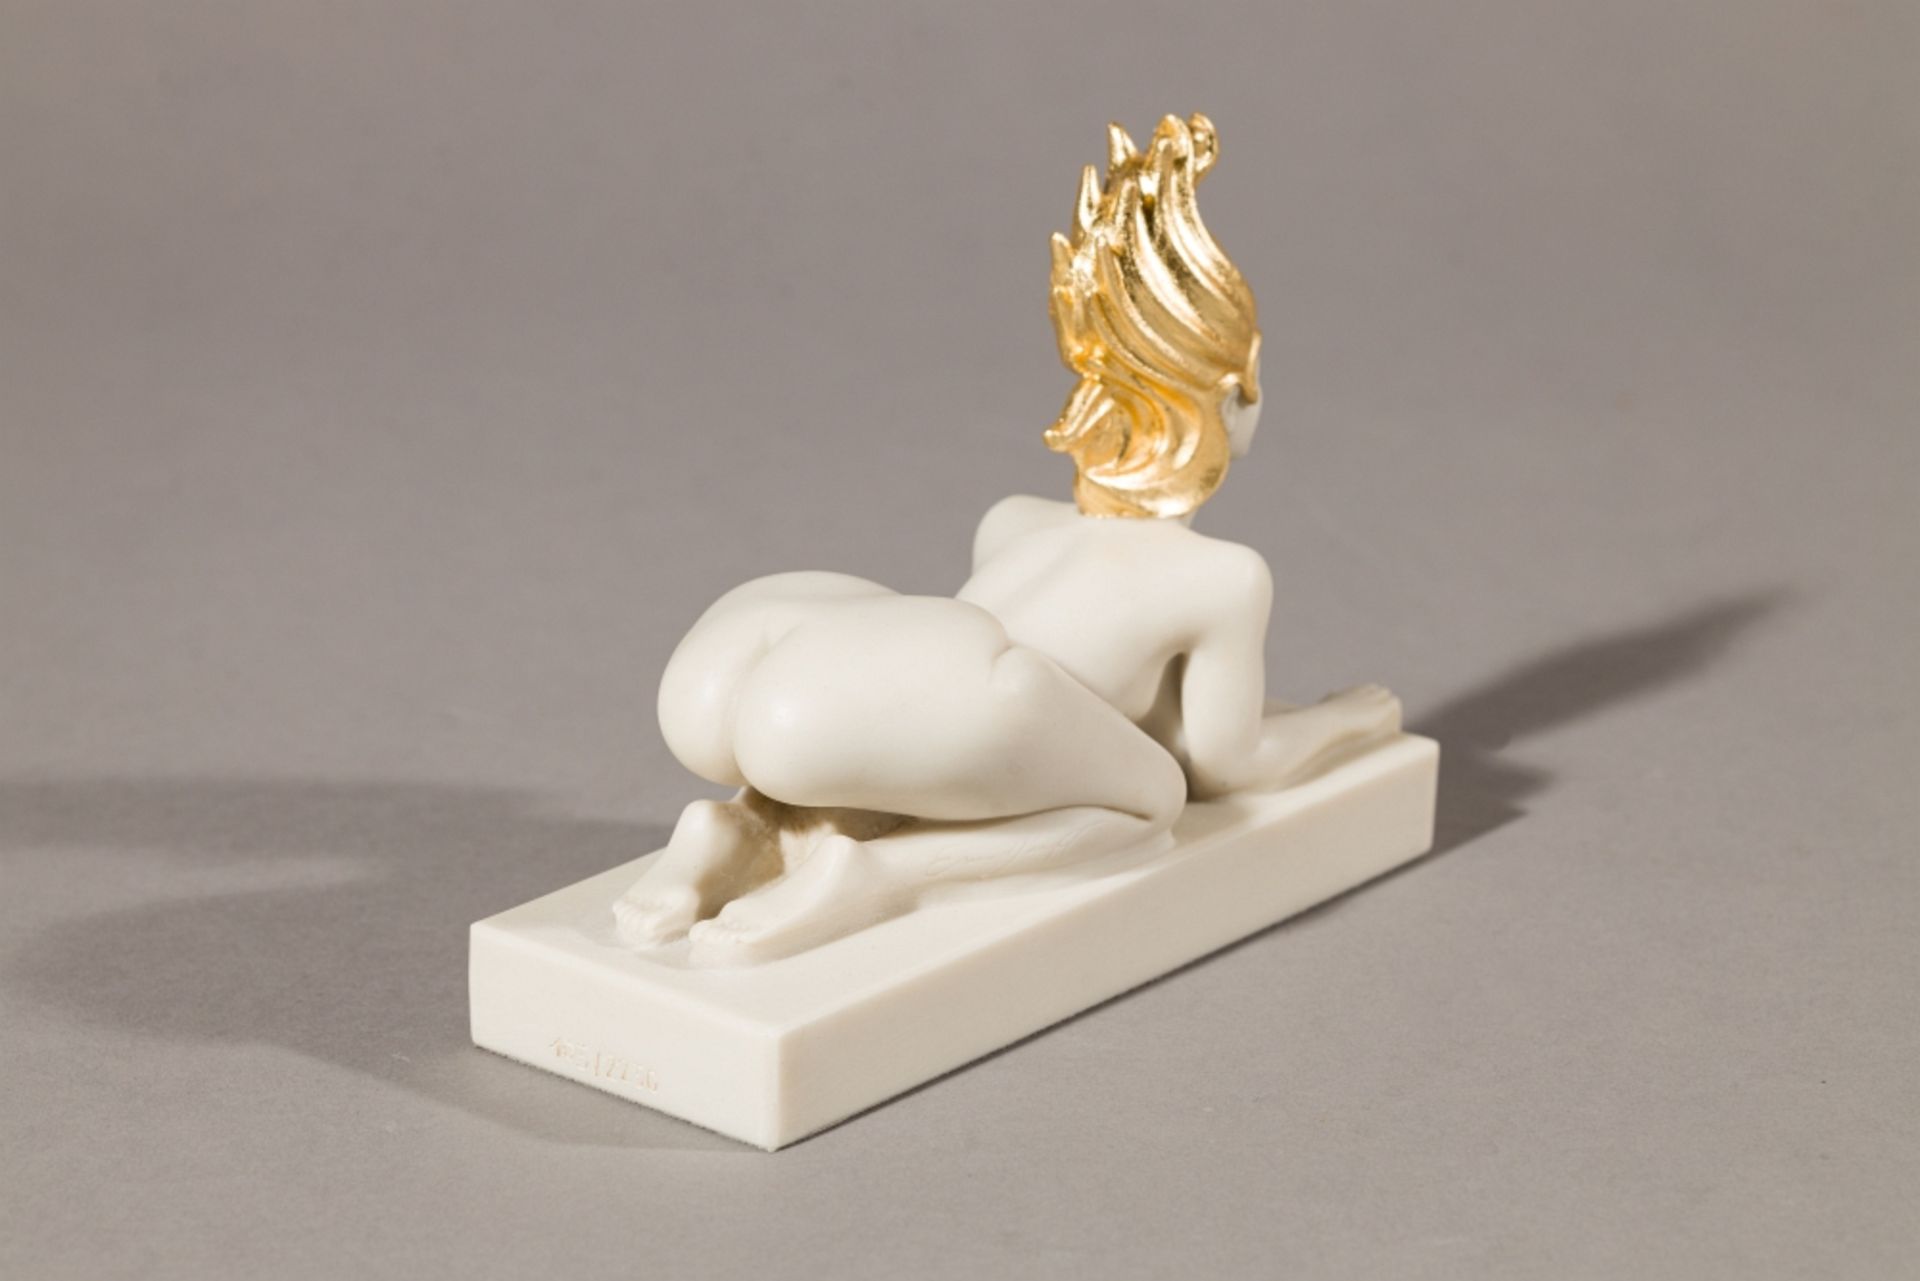 Fuchs, Ernst (1930 - 2015) Vienna Sphinx, 2013 Polymeric Art Casting, pratially Gold-Plated Signed - Image 4 of 8